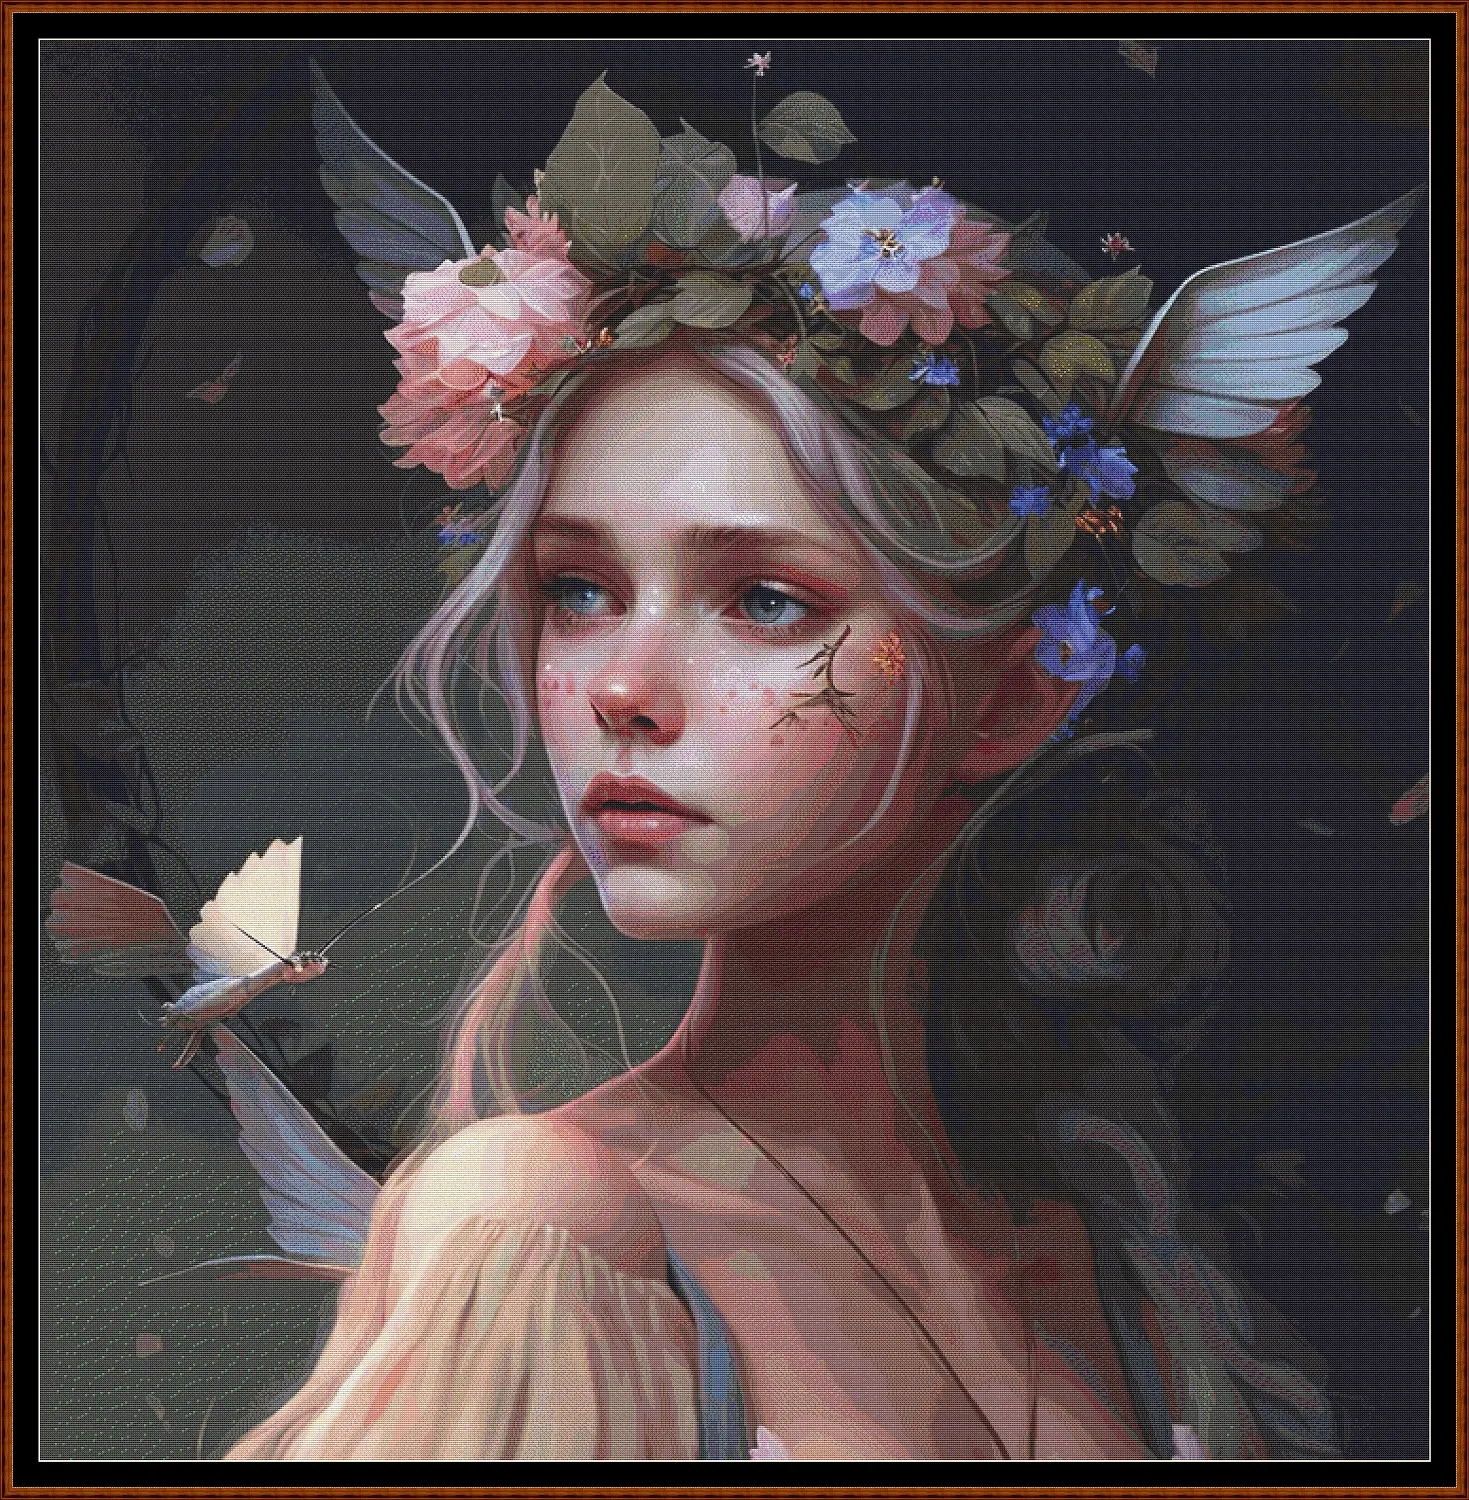 Fairy Portrait patterns are expertly created from art by crannpic under Public Domain CC0 license